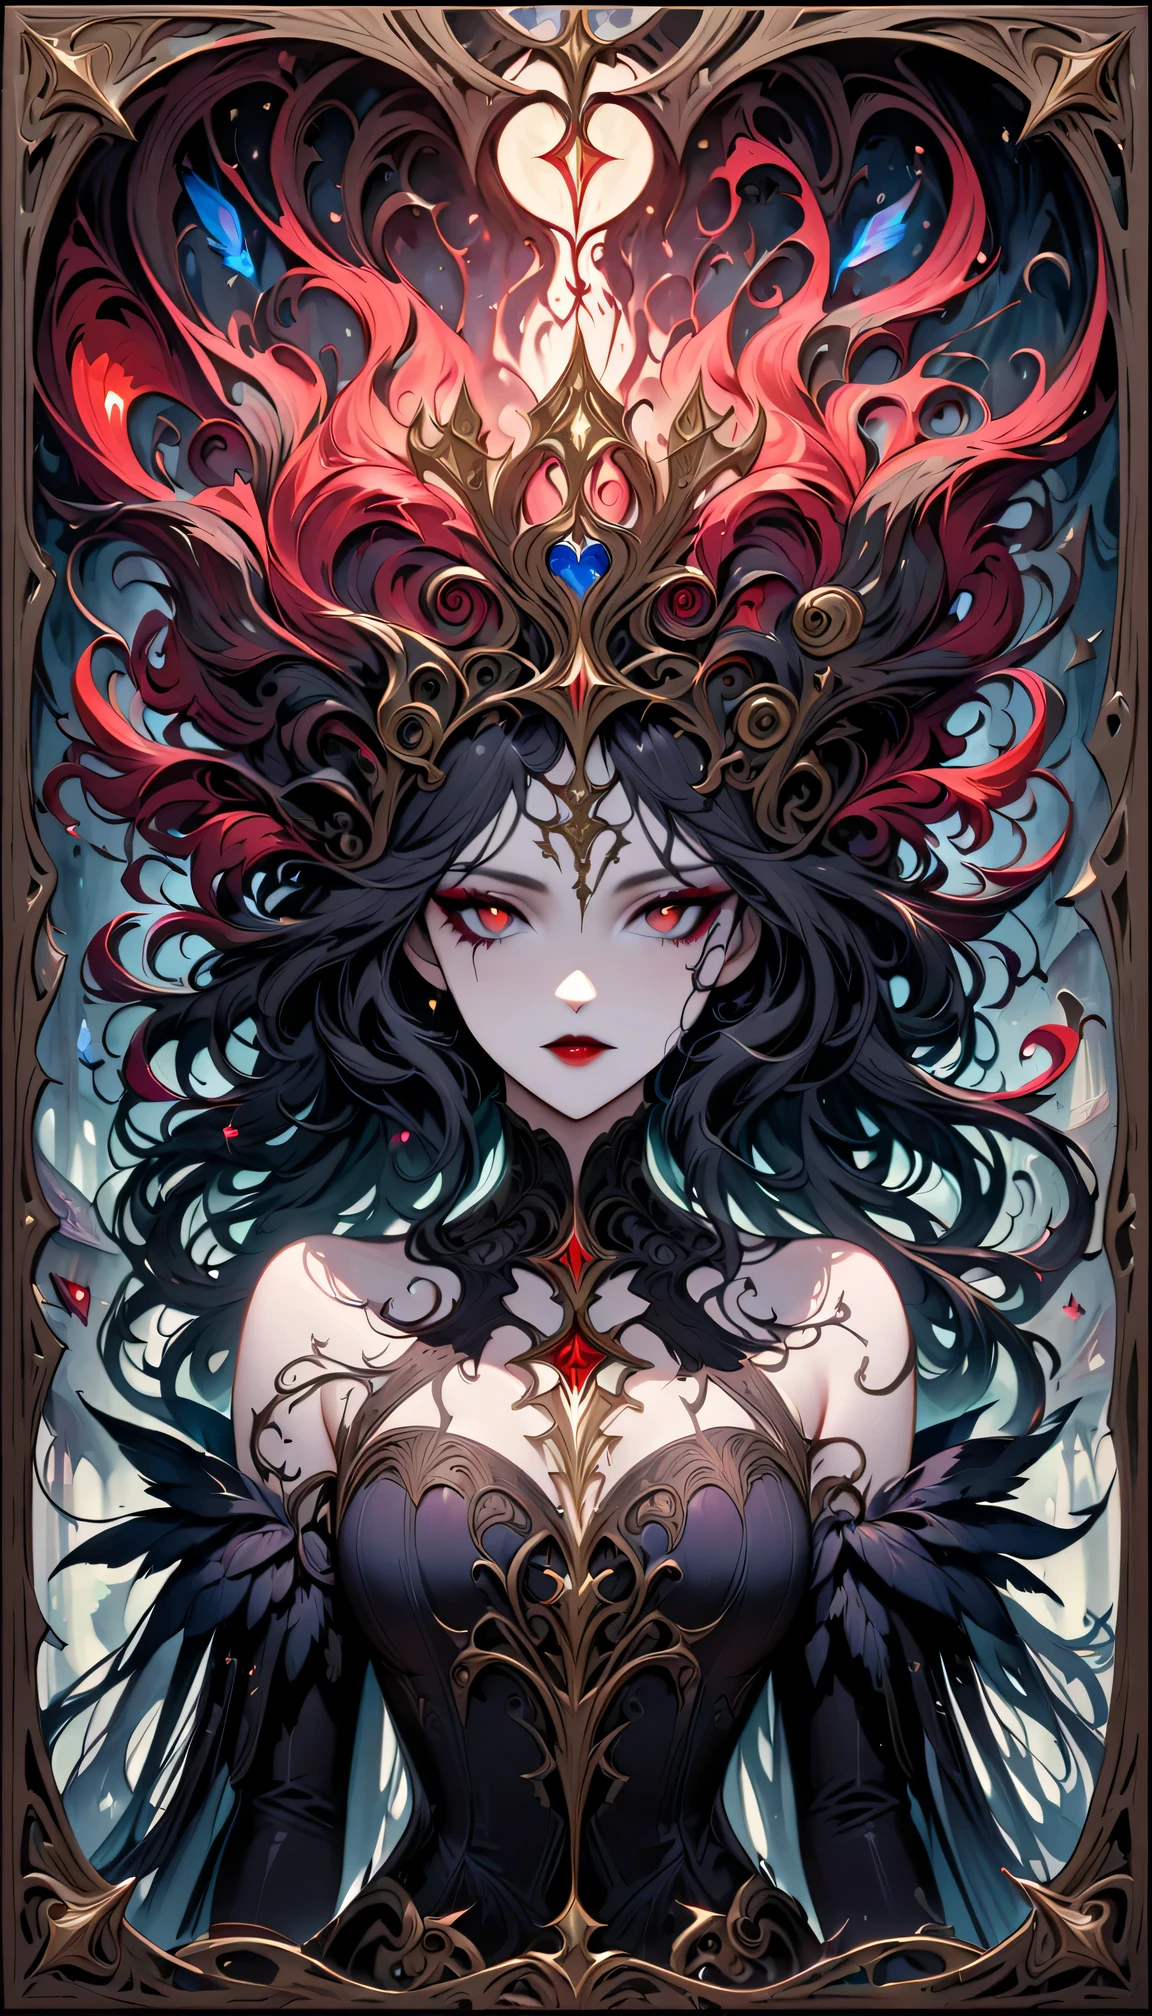 Tarot card: Mad Queen,dark fantasy,hauntingly beautiful,vivid colors,gothic horror,macabre atmosphere,fluid strokes,great attention to detail,Wooden border,fine linework,elaborately designed tarot card with intricate patterns,creepy and mesmerizing,richly textured,dramatic lighting,mysterious aura,distinctive style,exquisite artwork,shadowy background,mystical symbols,emotive expression,captivating gaze,feathered headdress,pale complexion,demonic features,long flowing hair with twisted strands,smoky eye makeup,intriguingly distorted face,dripping blood-red lipstick,ominous creatures lurking in the shadows,ethereal mist adding an otherworldly touch,moody tones enhancing the somber mood,impressive visual impact,foreboding vibe.